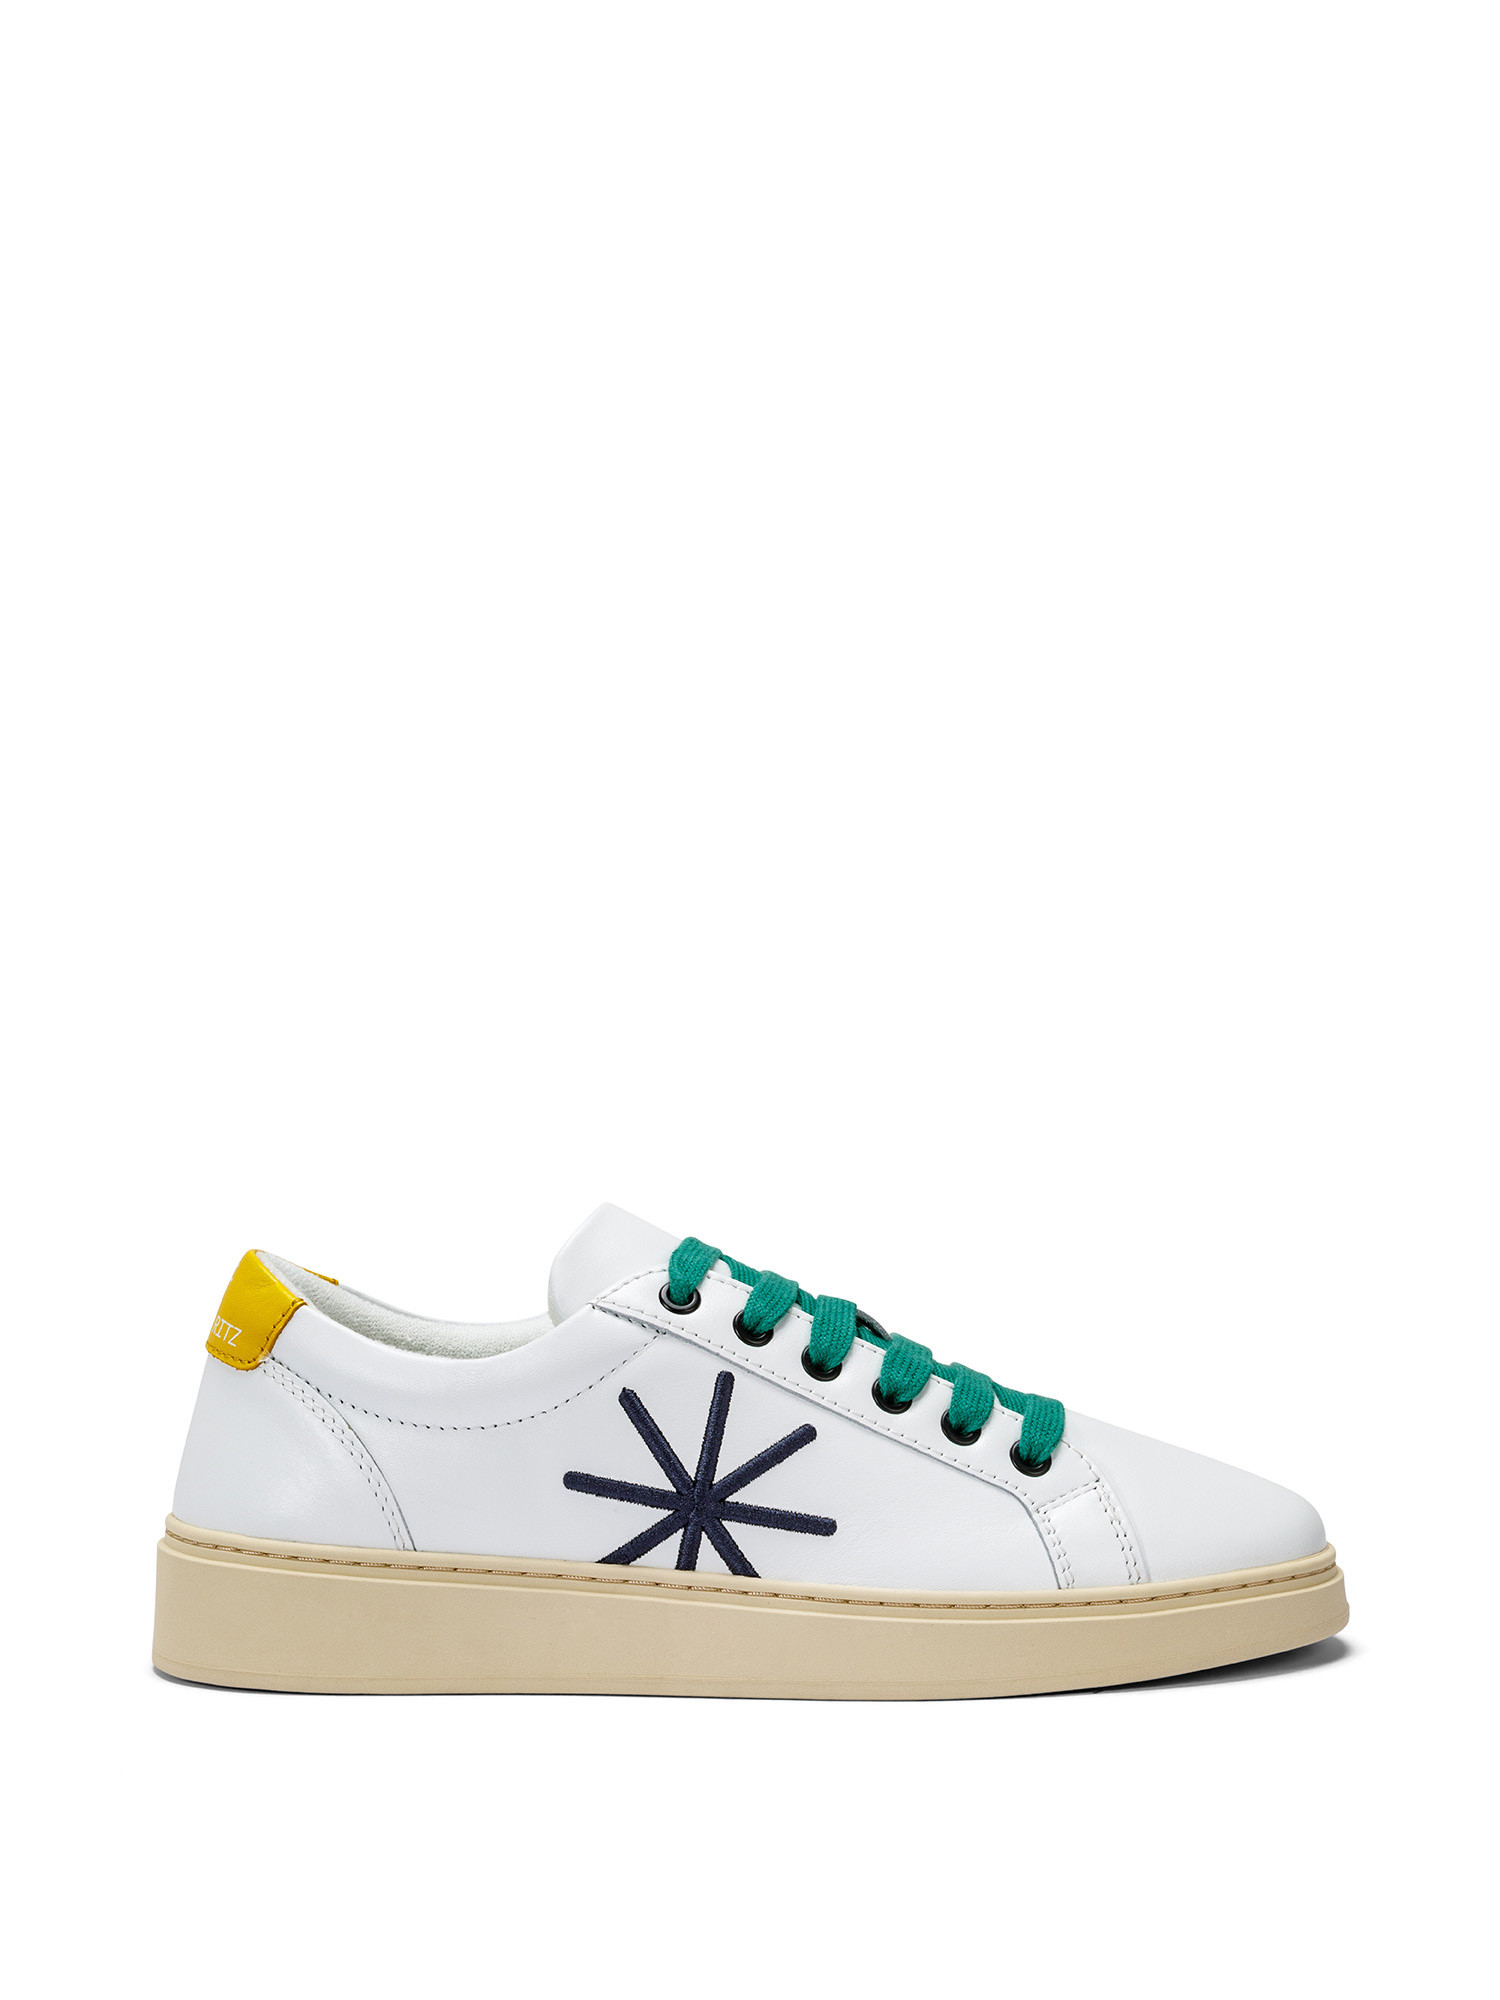 Manuel Ritz - Leather sneakers with logo, White, large image number 0